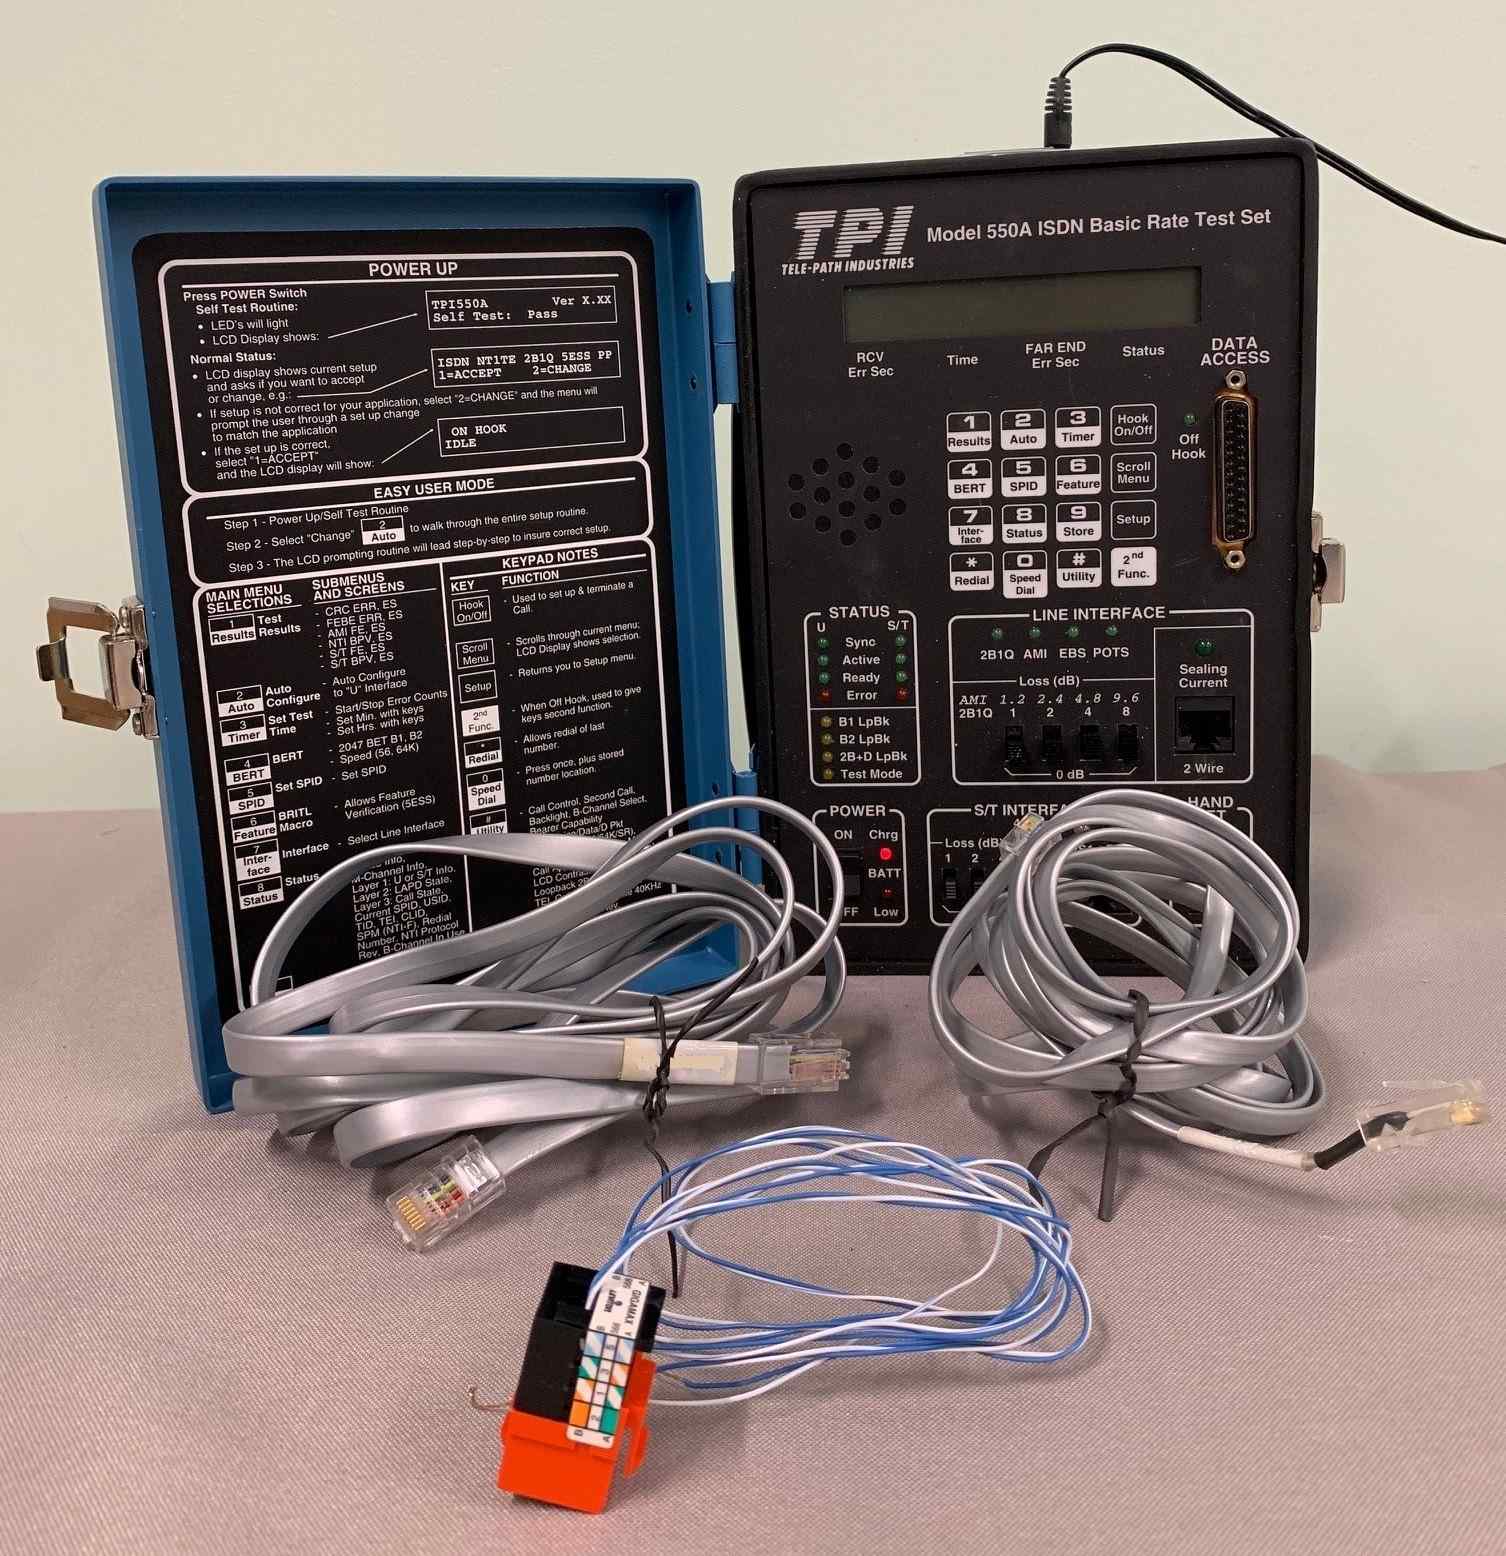 Tele-Path Industries Model 550A ISDN Basic Rate Test Set